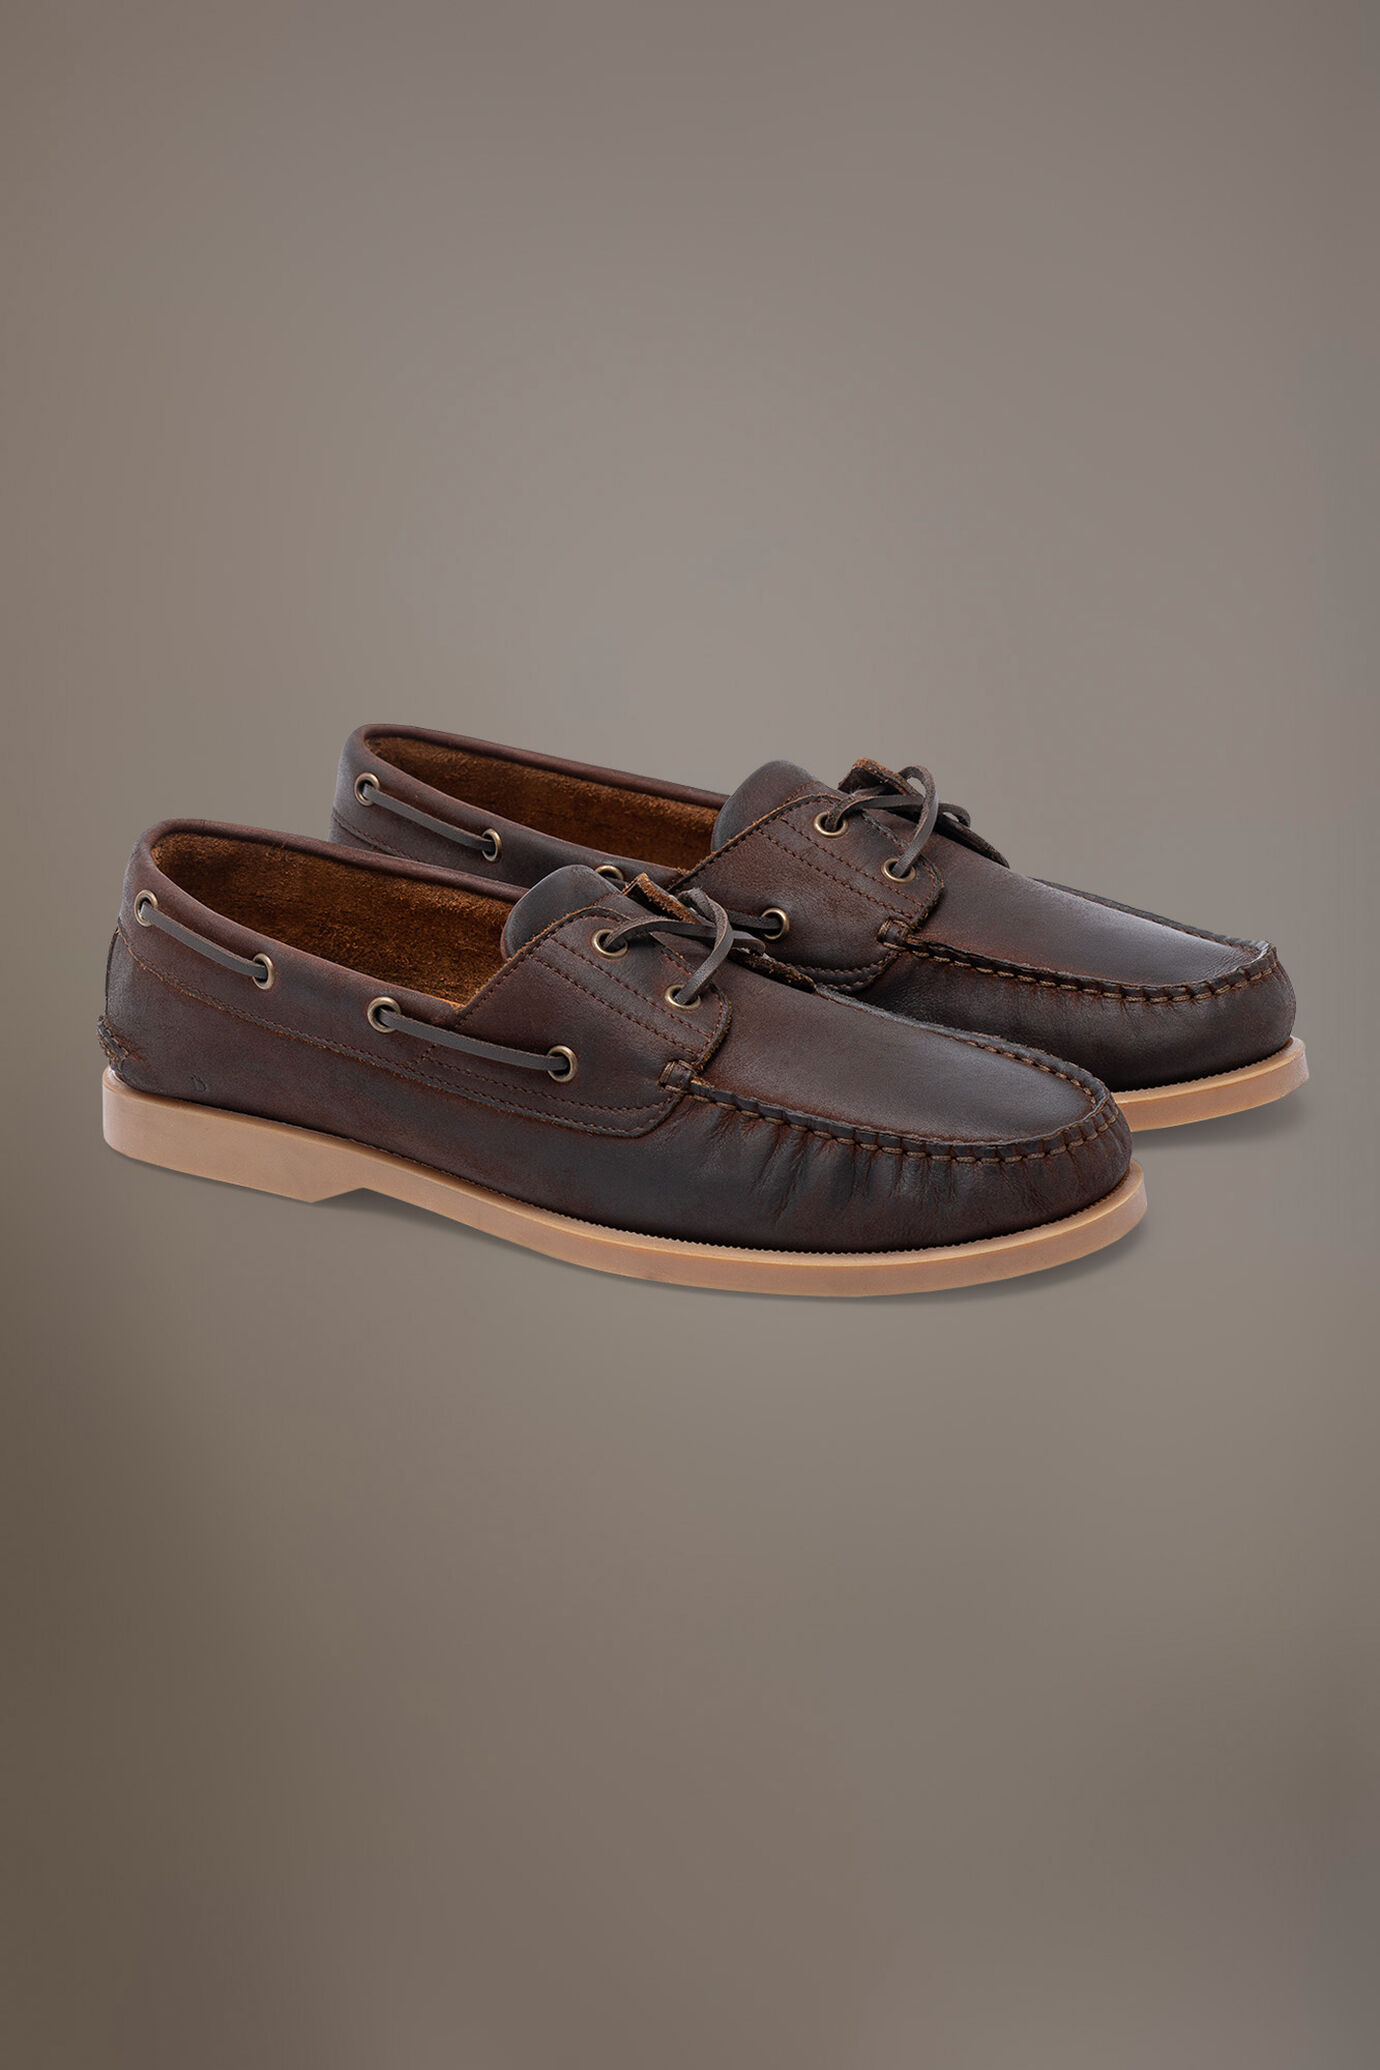 Leather boat shoes 100% aged leather with rubber sole